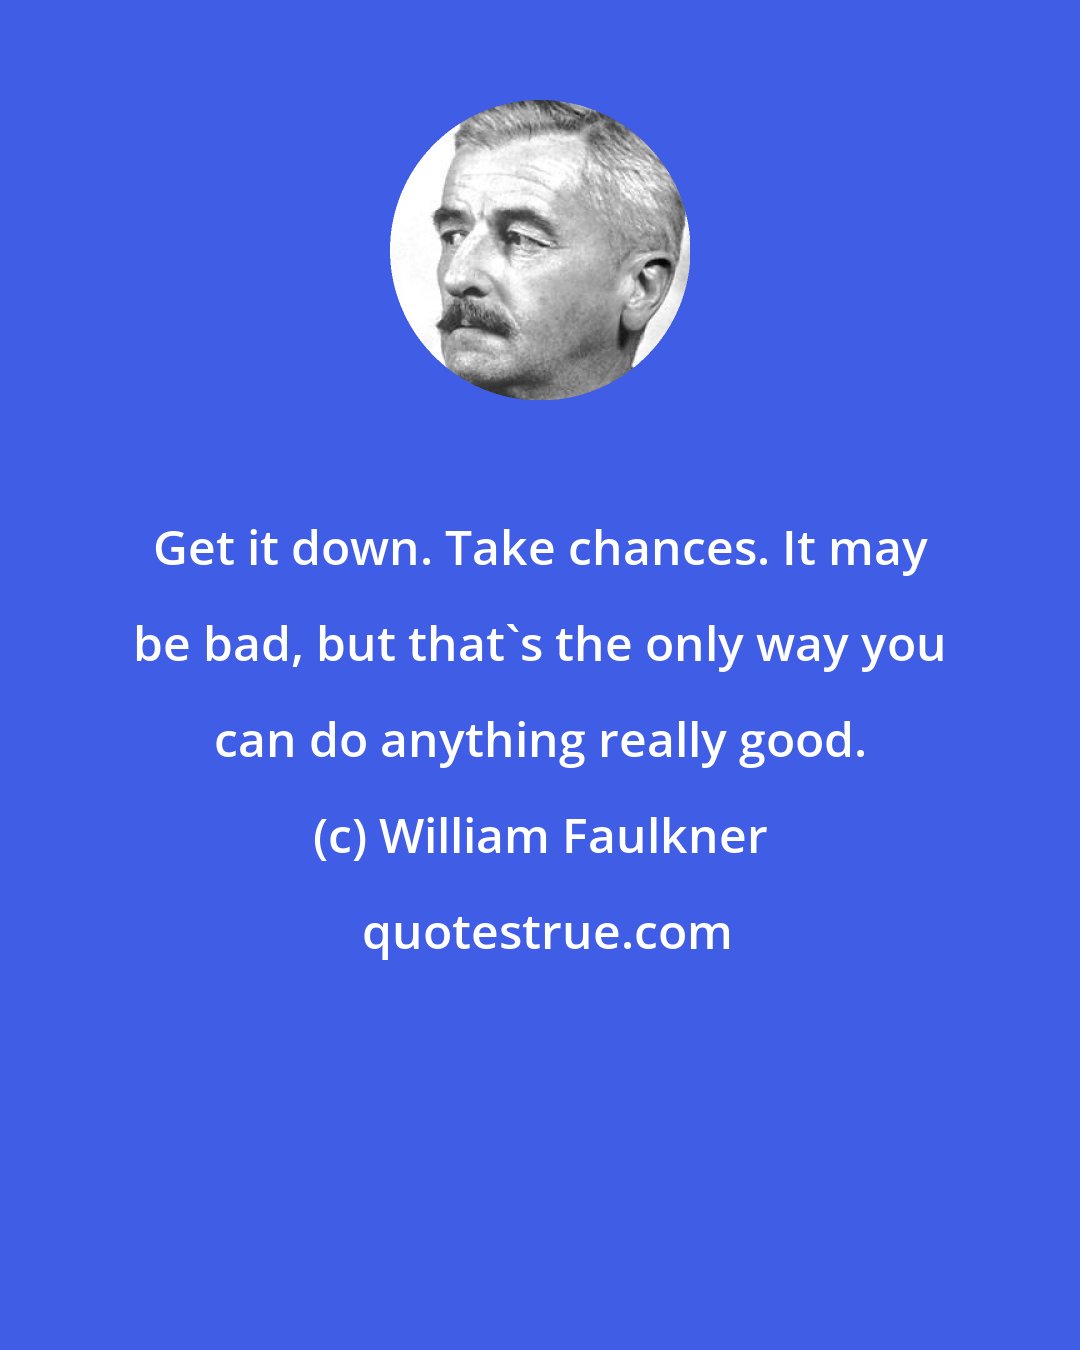 William Faulkner: Get it down. Take chances. It may be bad, but that's the only way you can do anything really good.